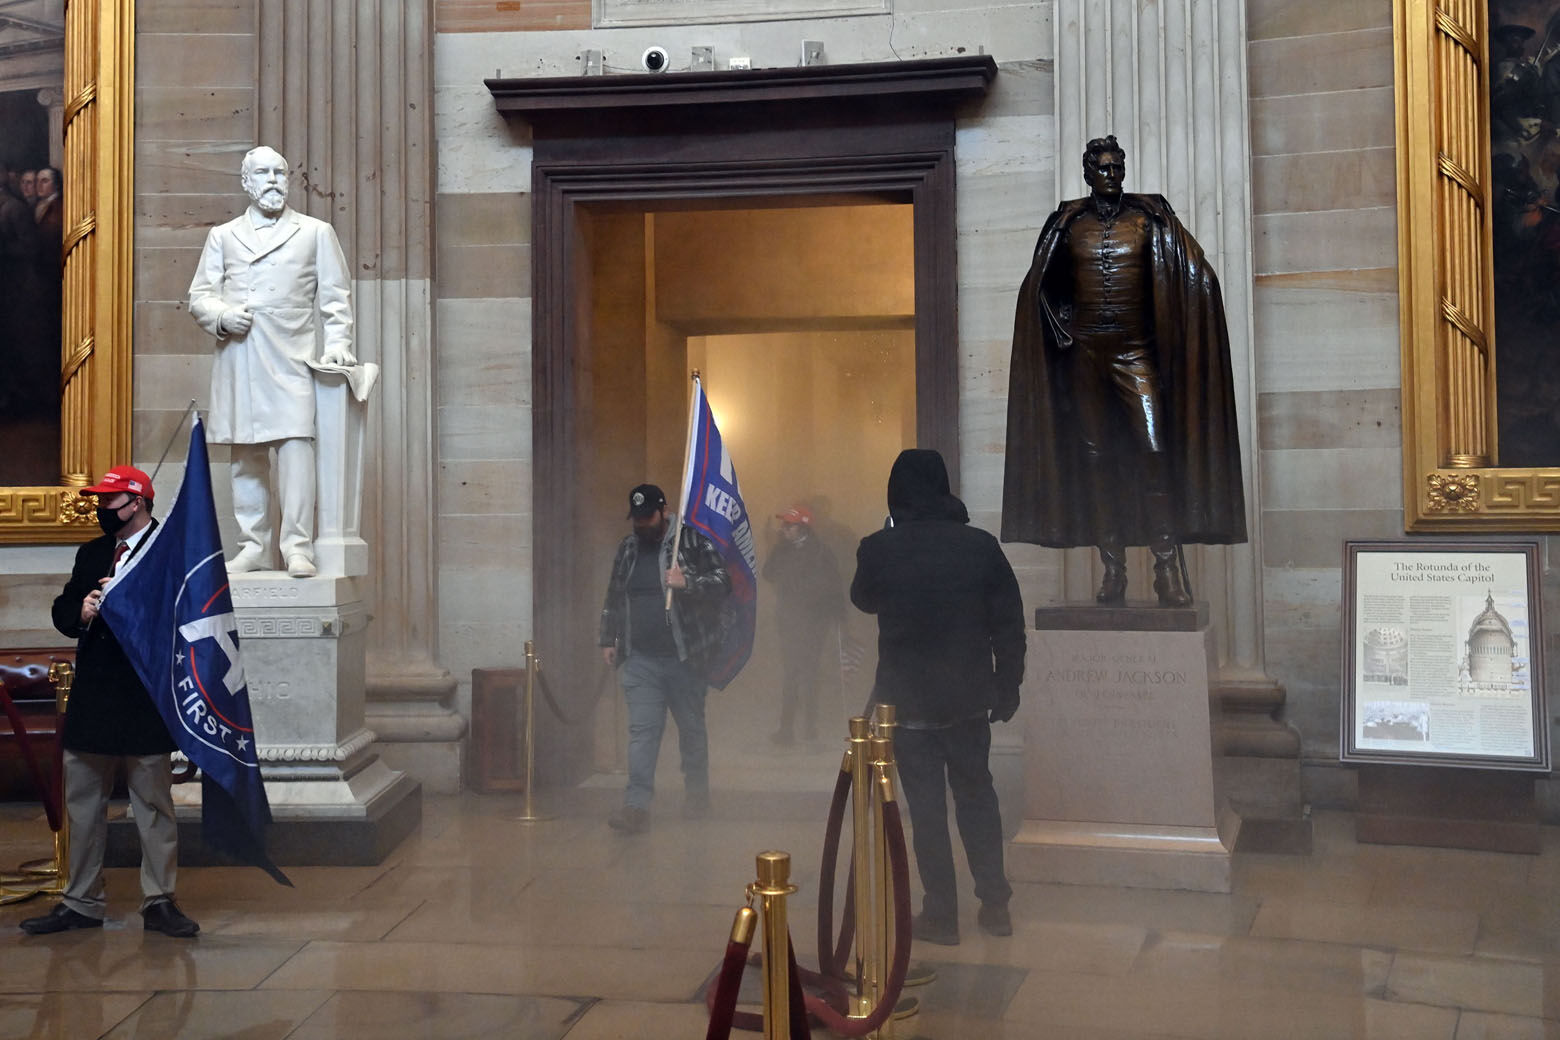 Supporters of US President Donald Trump enter the US Capitol's Rotunda as reported tear gas smoke fills a corridor on January 6, 2021, in Washington, DC. - Demonstrators breeched security and entered the Capitol as Congress debated the a 2020 presidential election Electoral Vote Certification. (Photo by Saul LOEB / AFP) (Photo by SAUL LOEB/AFP via Getty Images)